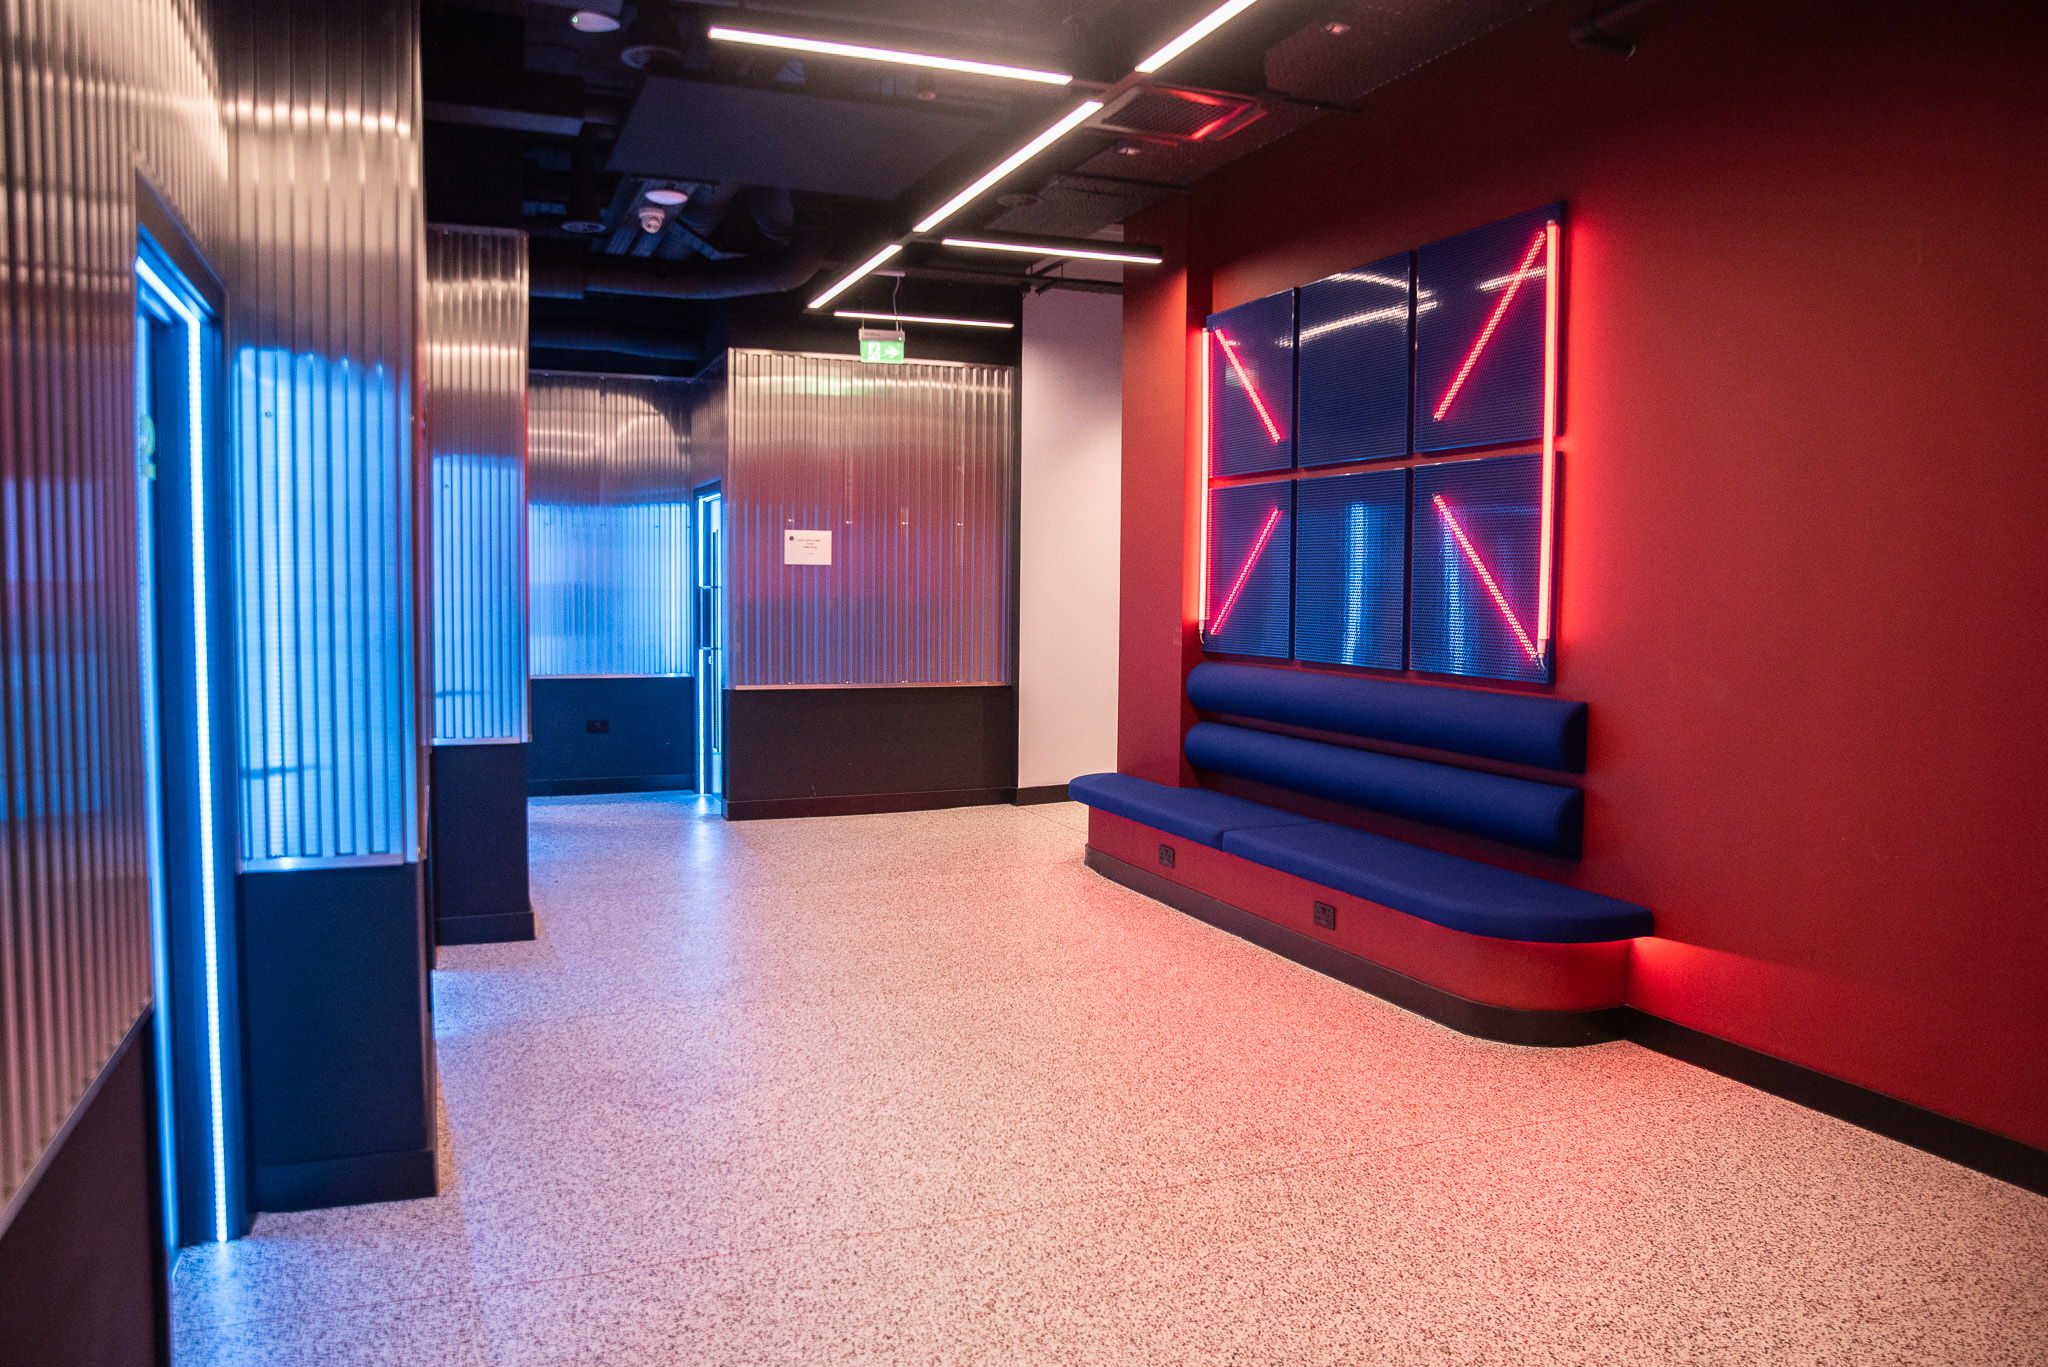 ACC London campus corridor with seating